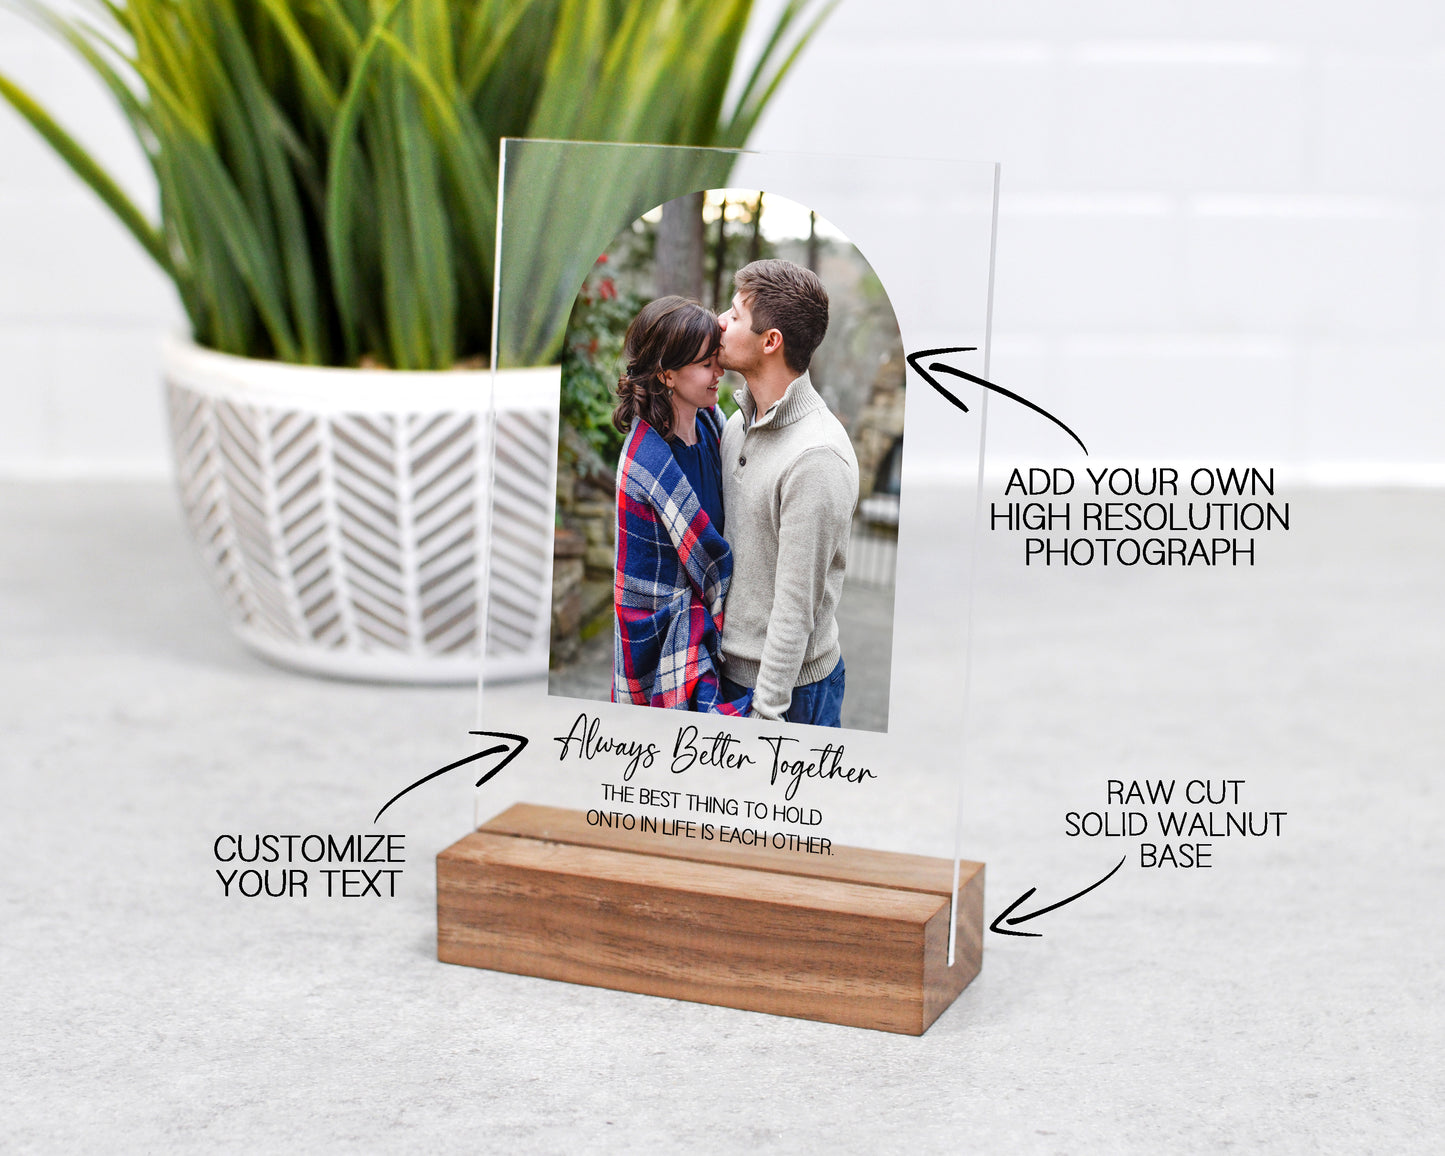 customize your text, add your own high resolution photograph, and add optional raw cut solid walnut base